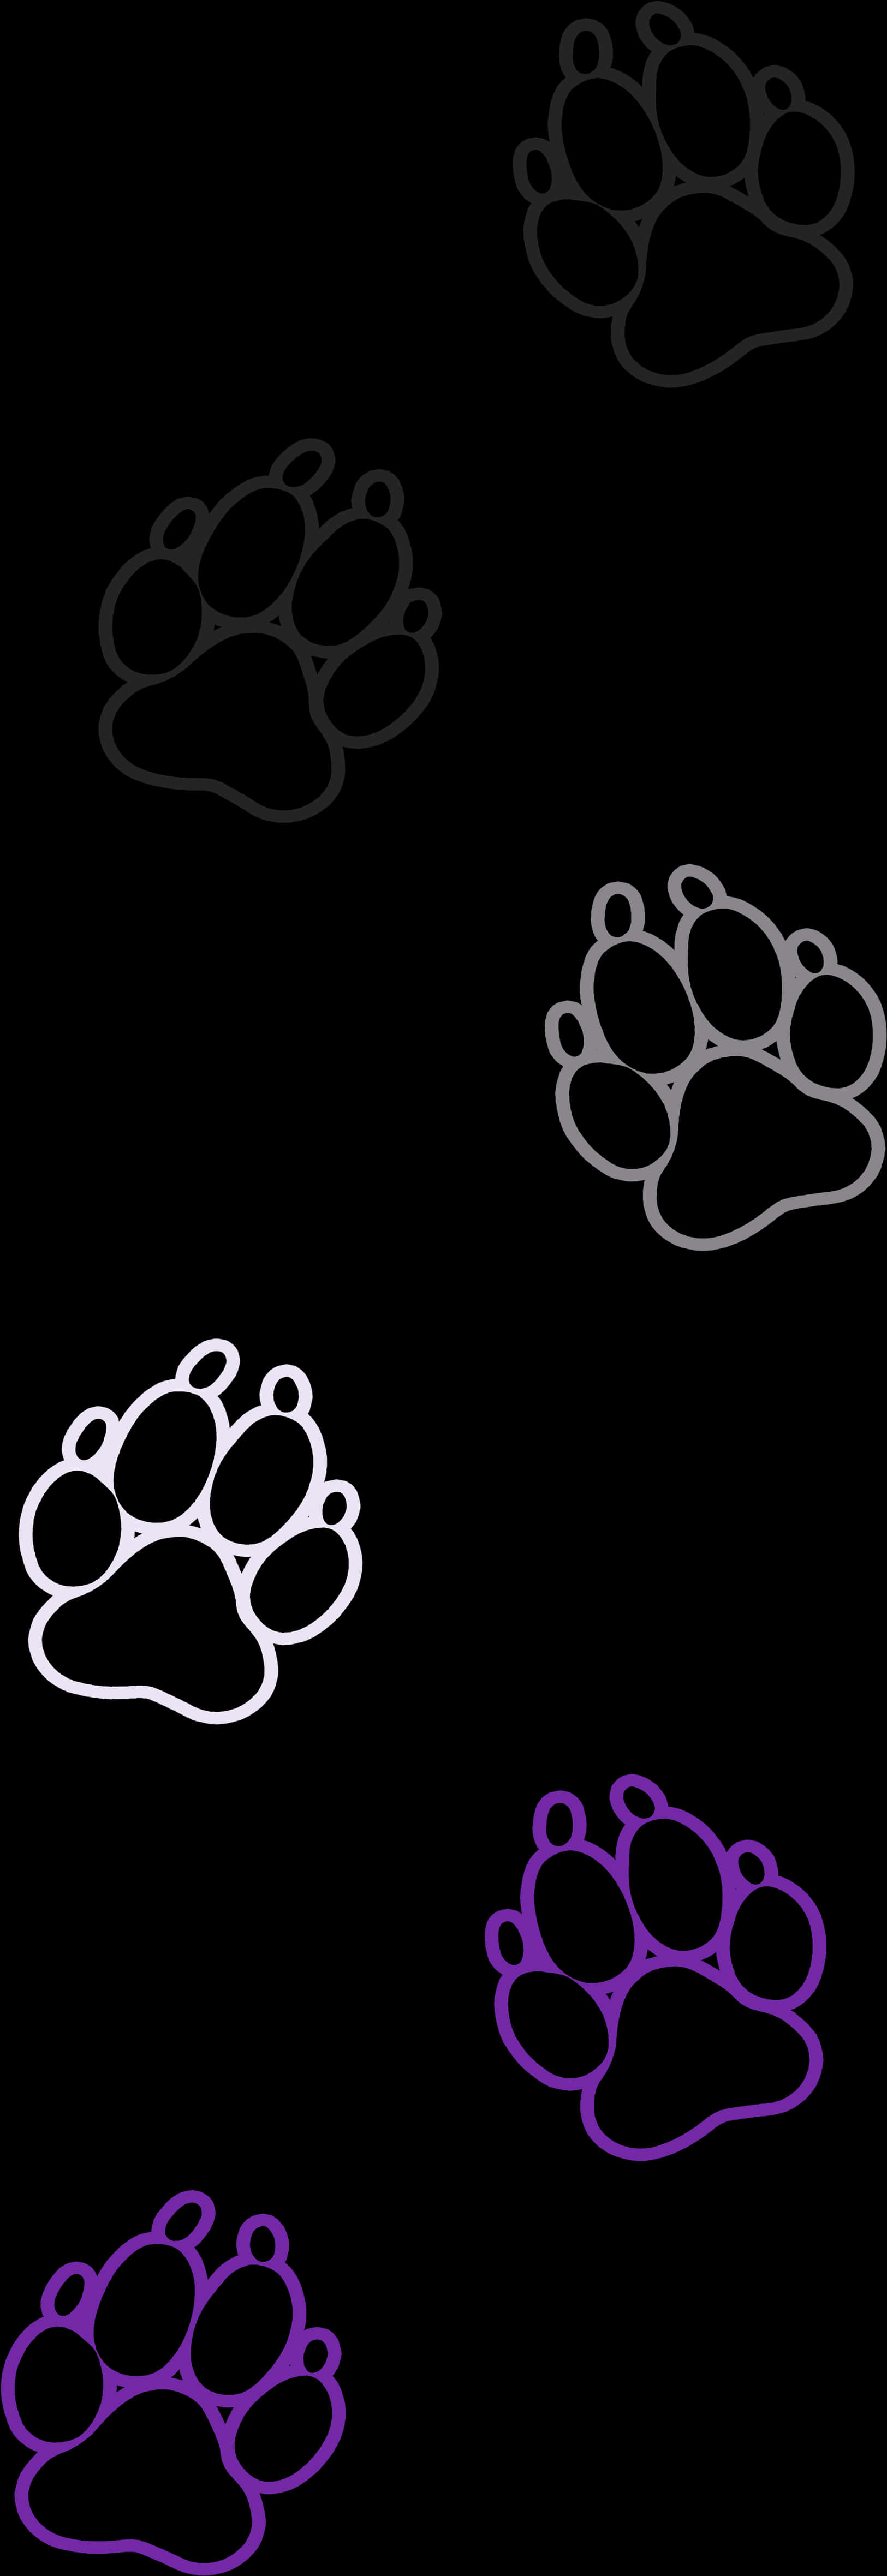 Neon Glow Dog Paws Vertical PNG image